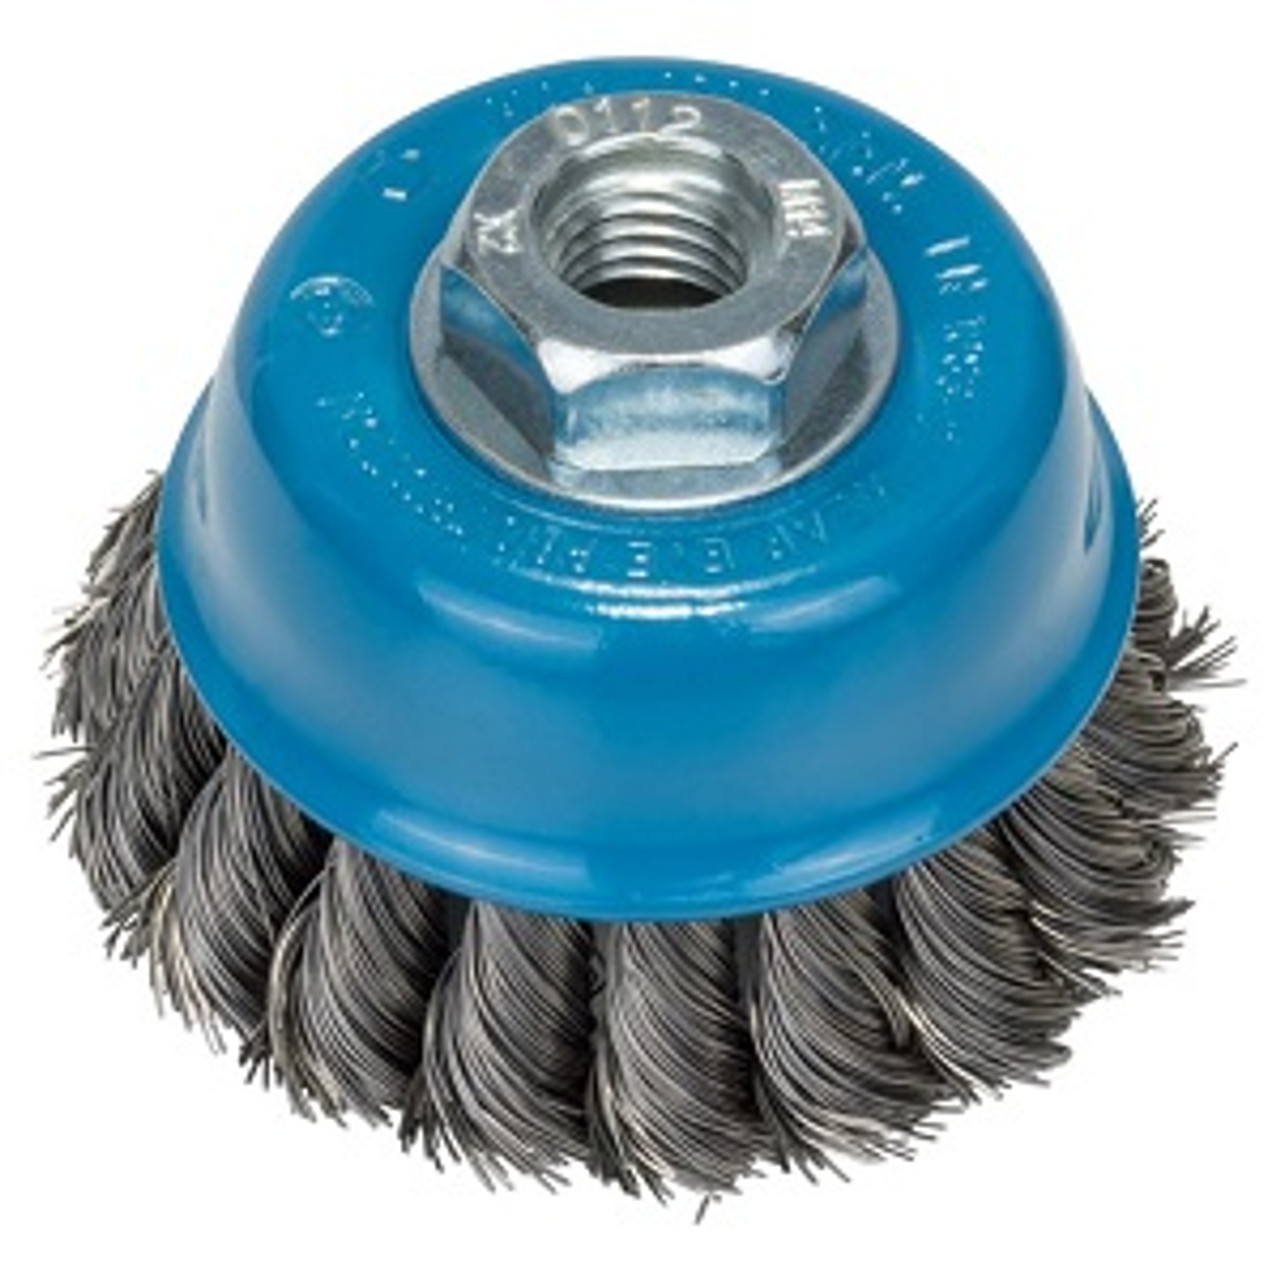 Buy online Bosch Wire cup brush 65 mm, 0,35 mm, M14 (knotted) from